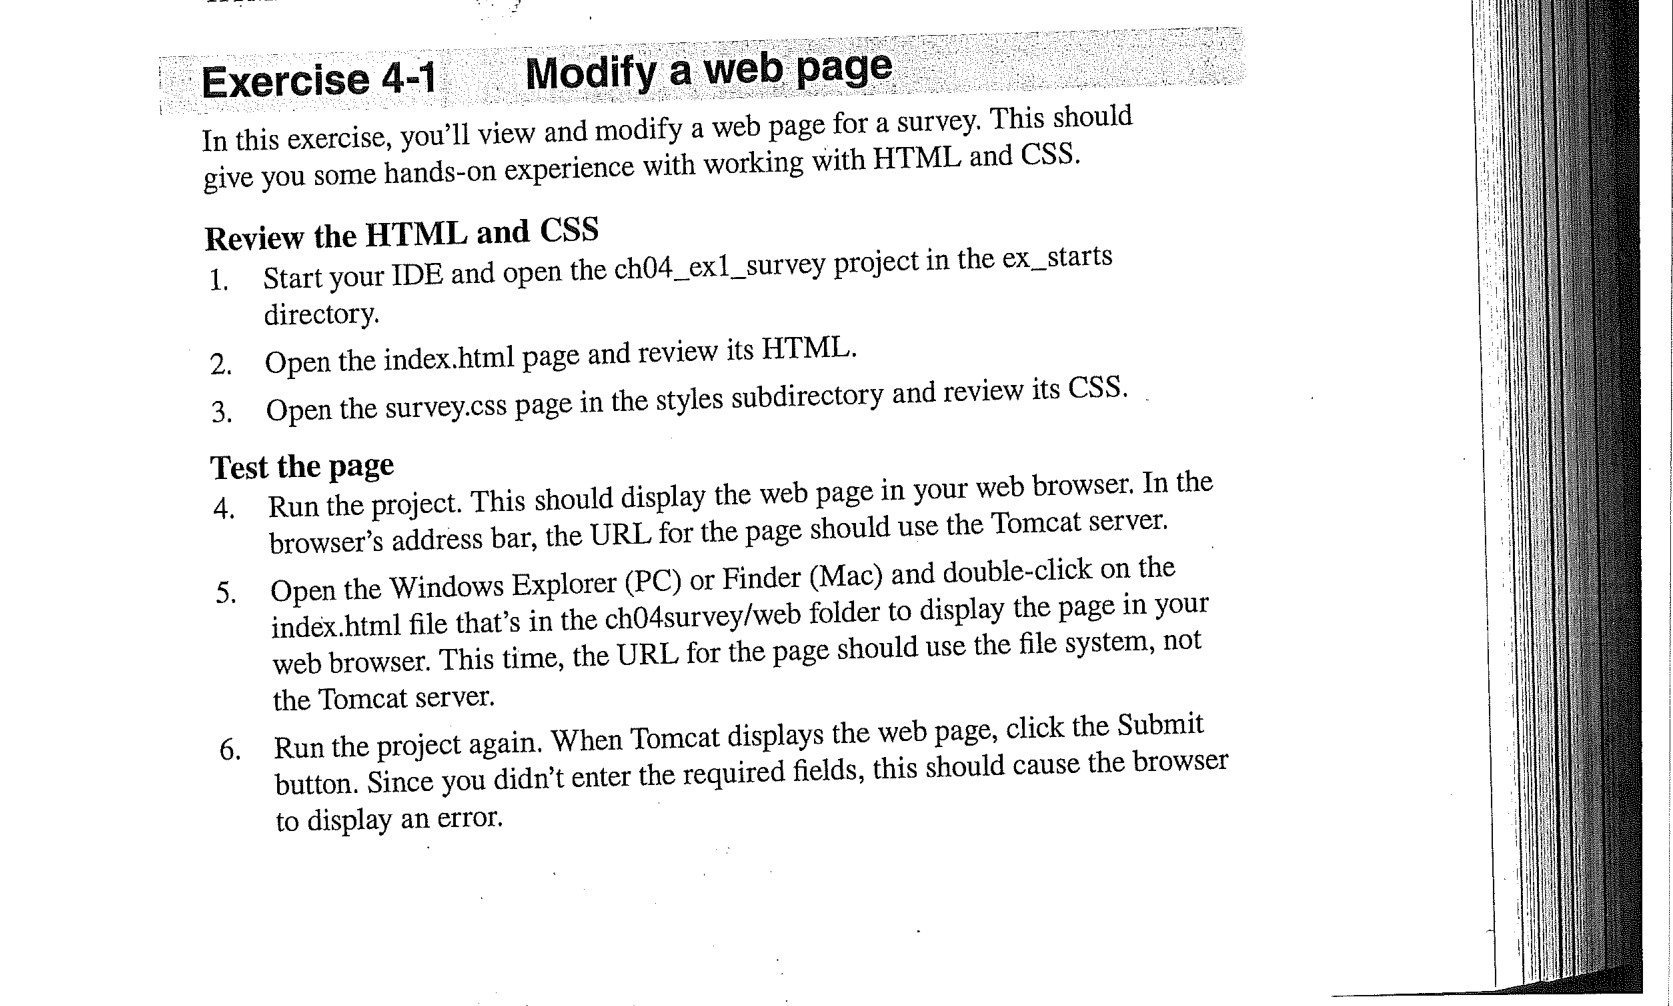 exercise-4-1-modify-a-web-page-in-this-exercise-chegg